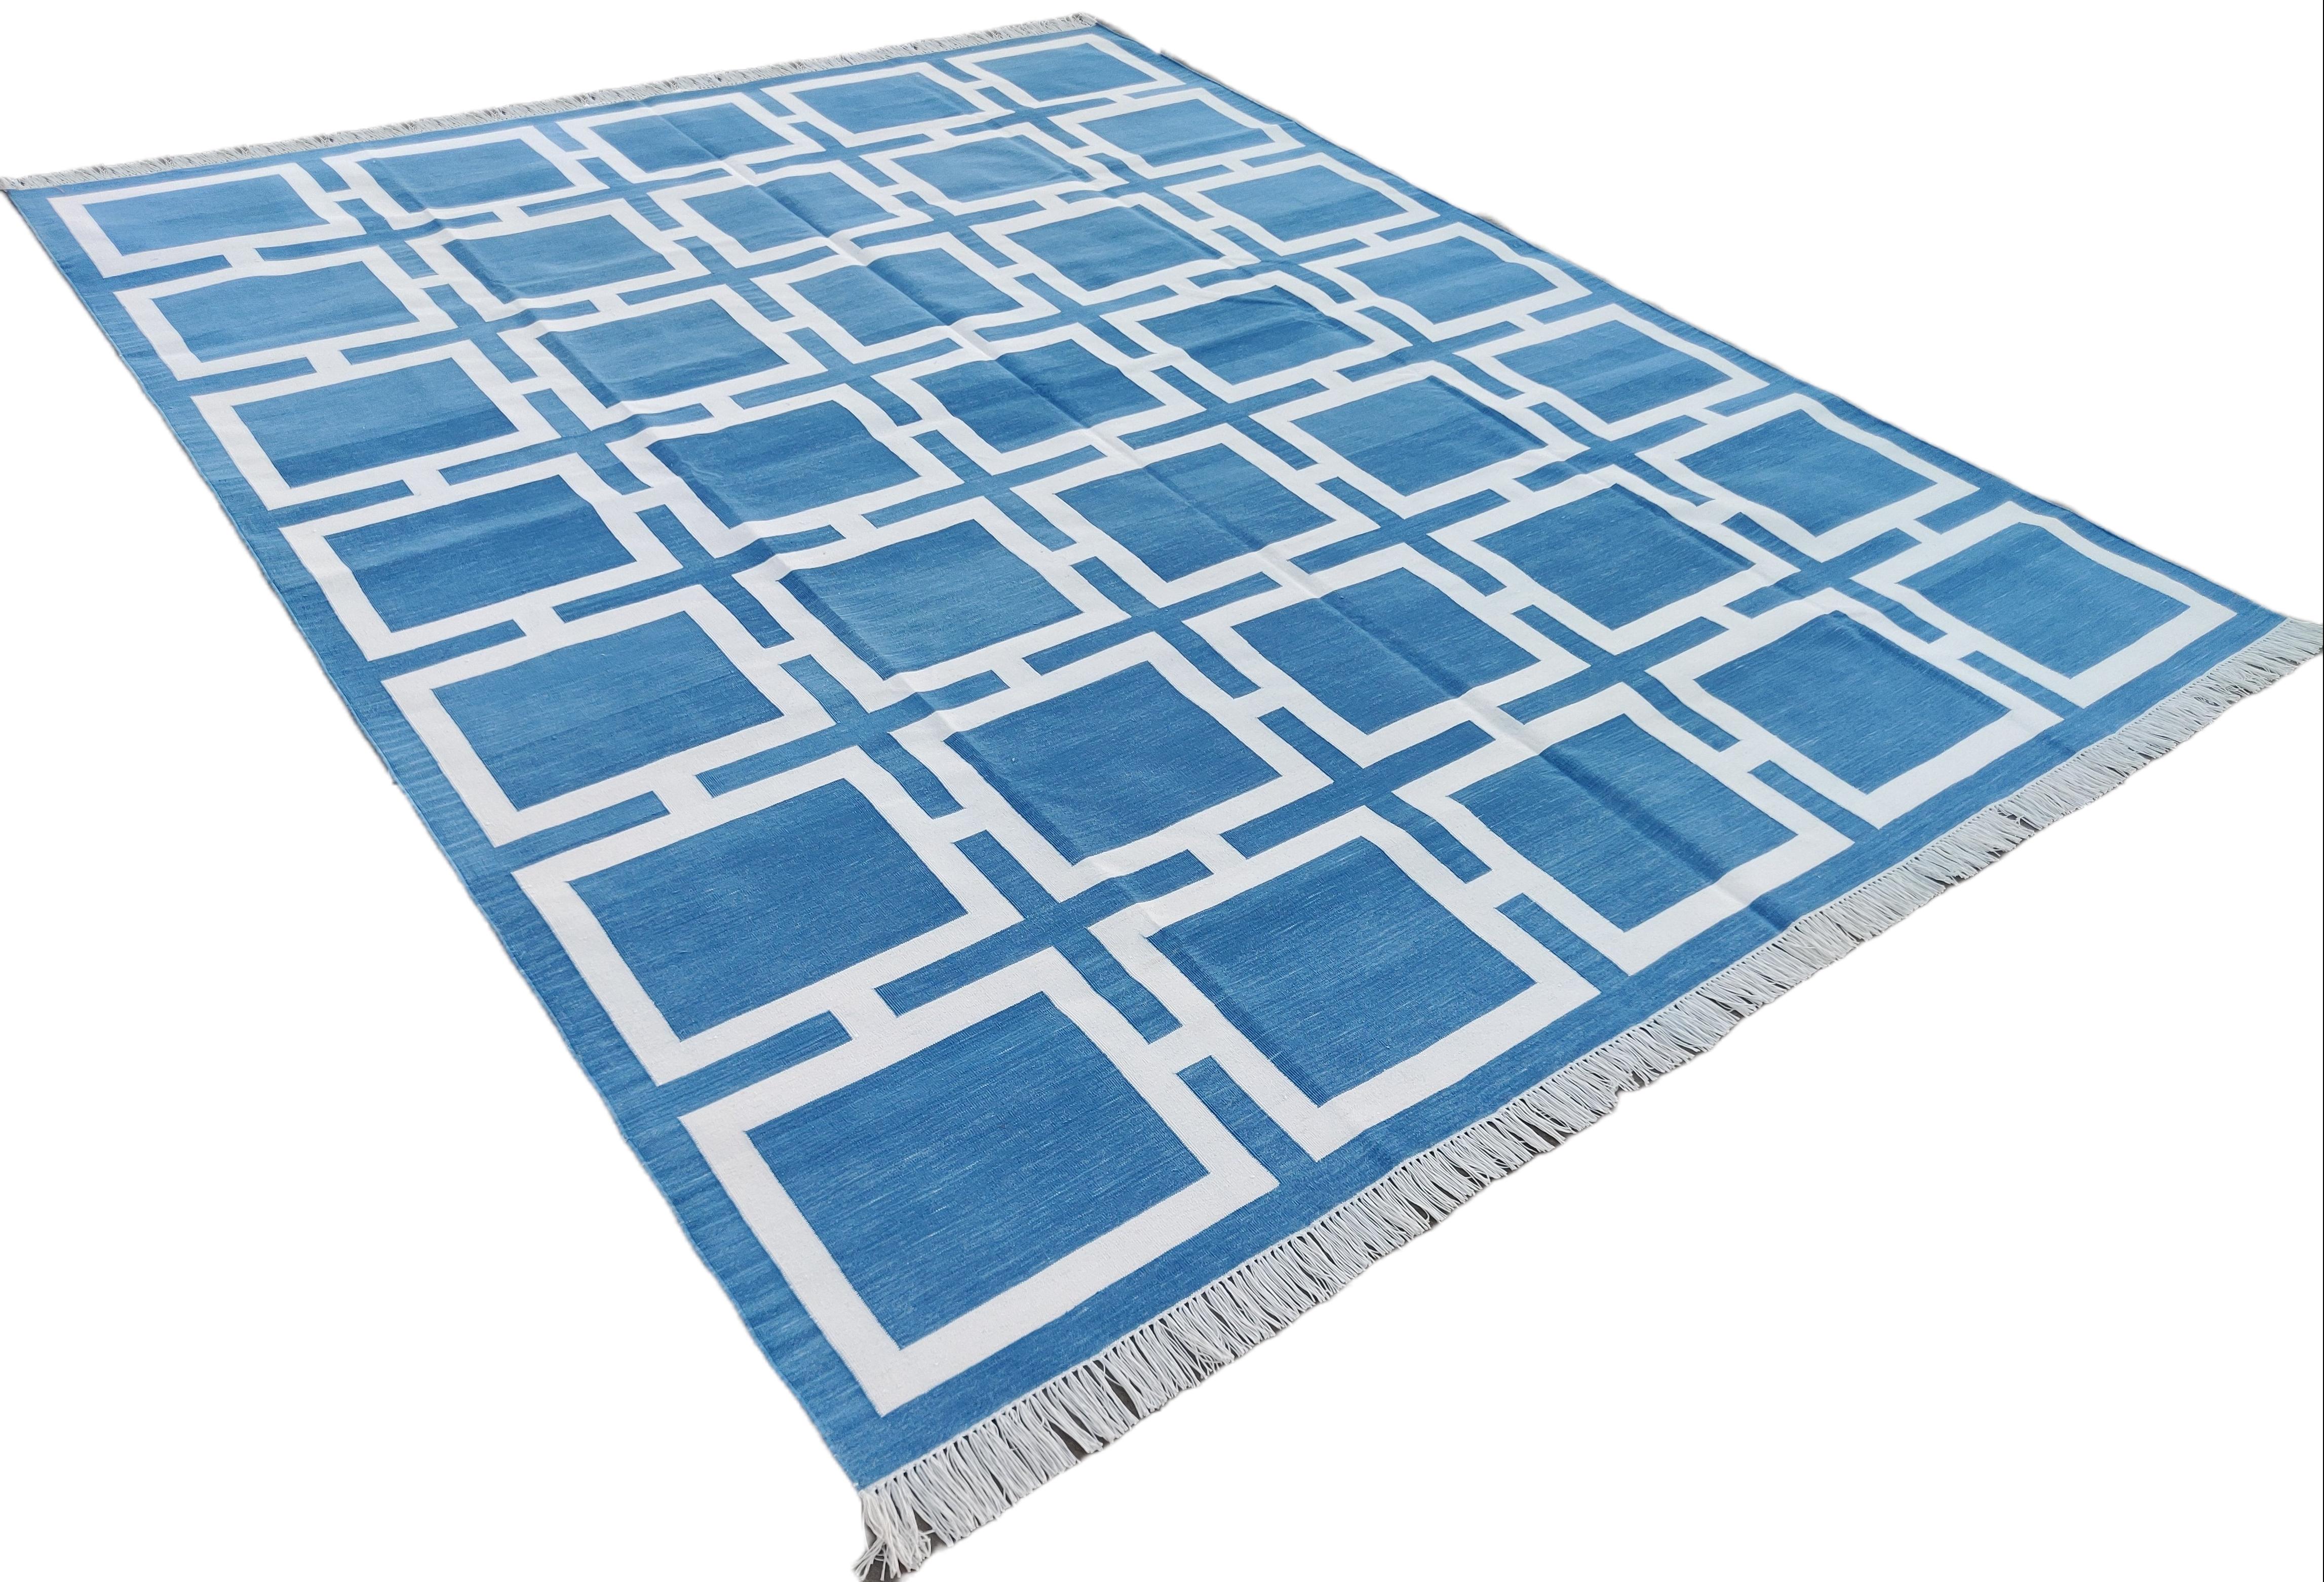 Cotton Vegetable Dyed Reversible Sky Blue And White Geometric Patterned Indian Rug - 8'x10'
These special flat-weave dhurries are hand-woven with 15 ply 100% cotton yarn. Due to the special manufacturing techniques used to create our rugs, the size